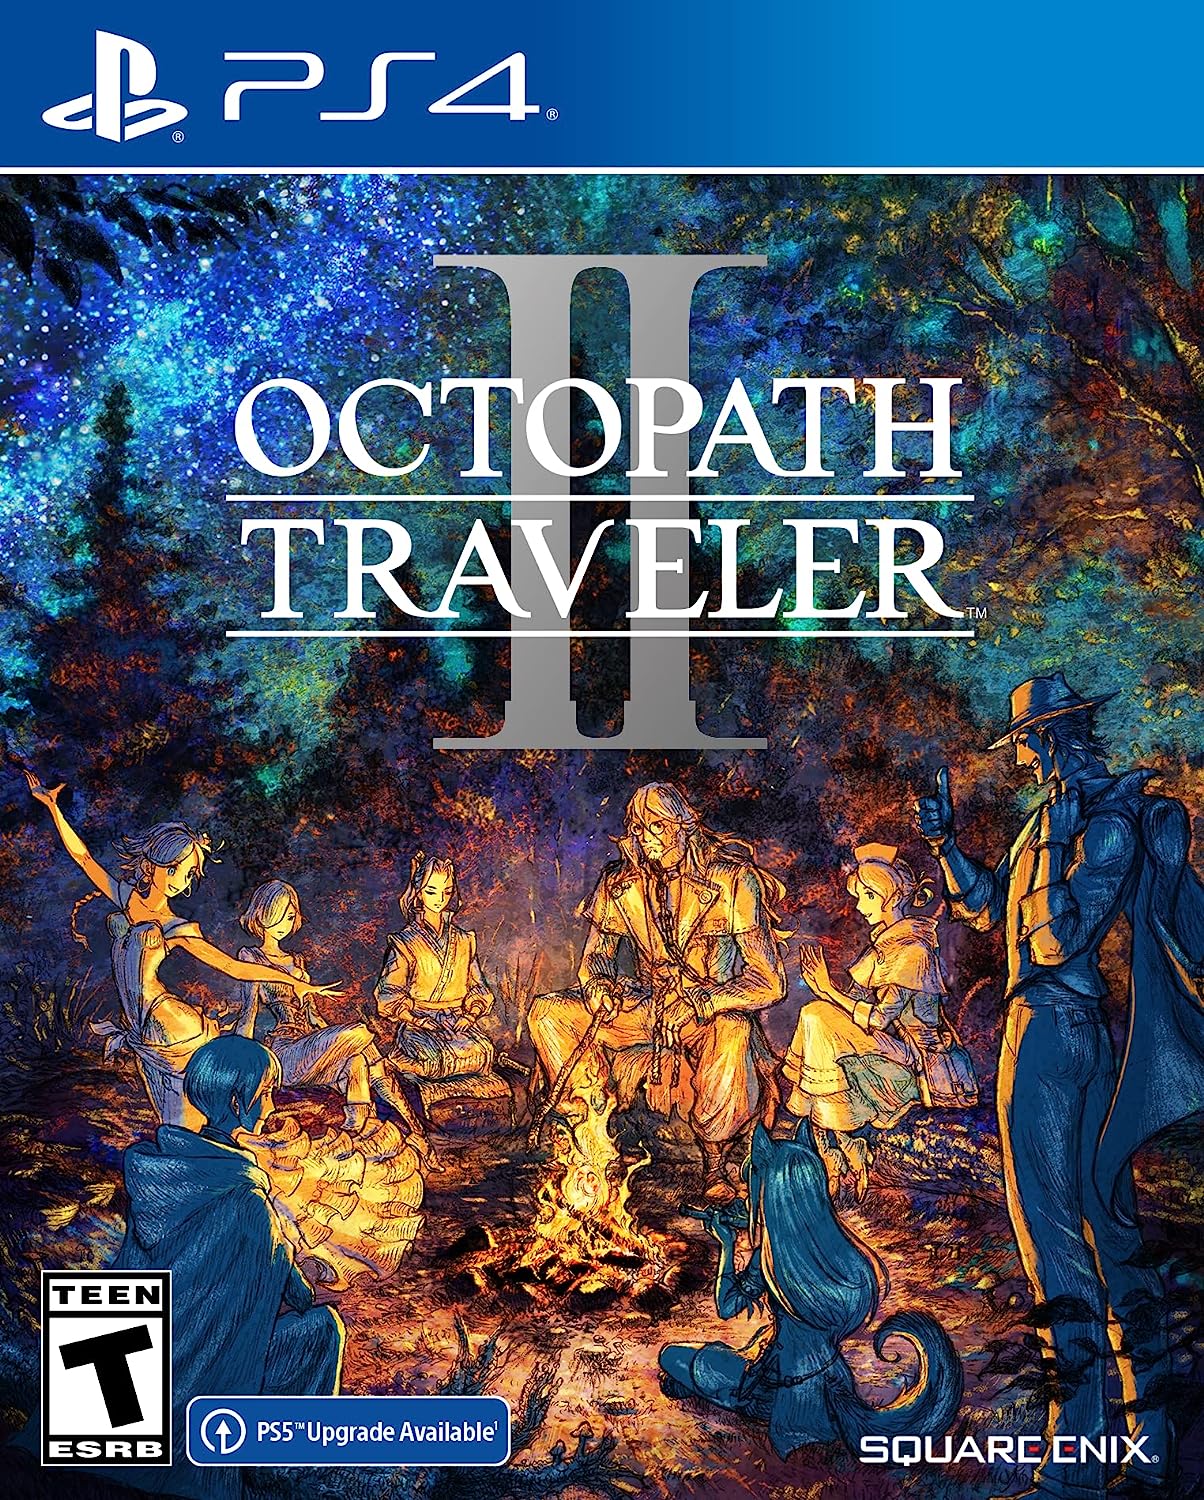 $39.99: Octopath Traveler II (Nintendo Switch, PS4 or PS5) (Prime Members)